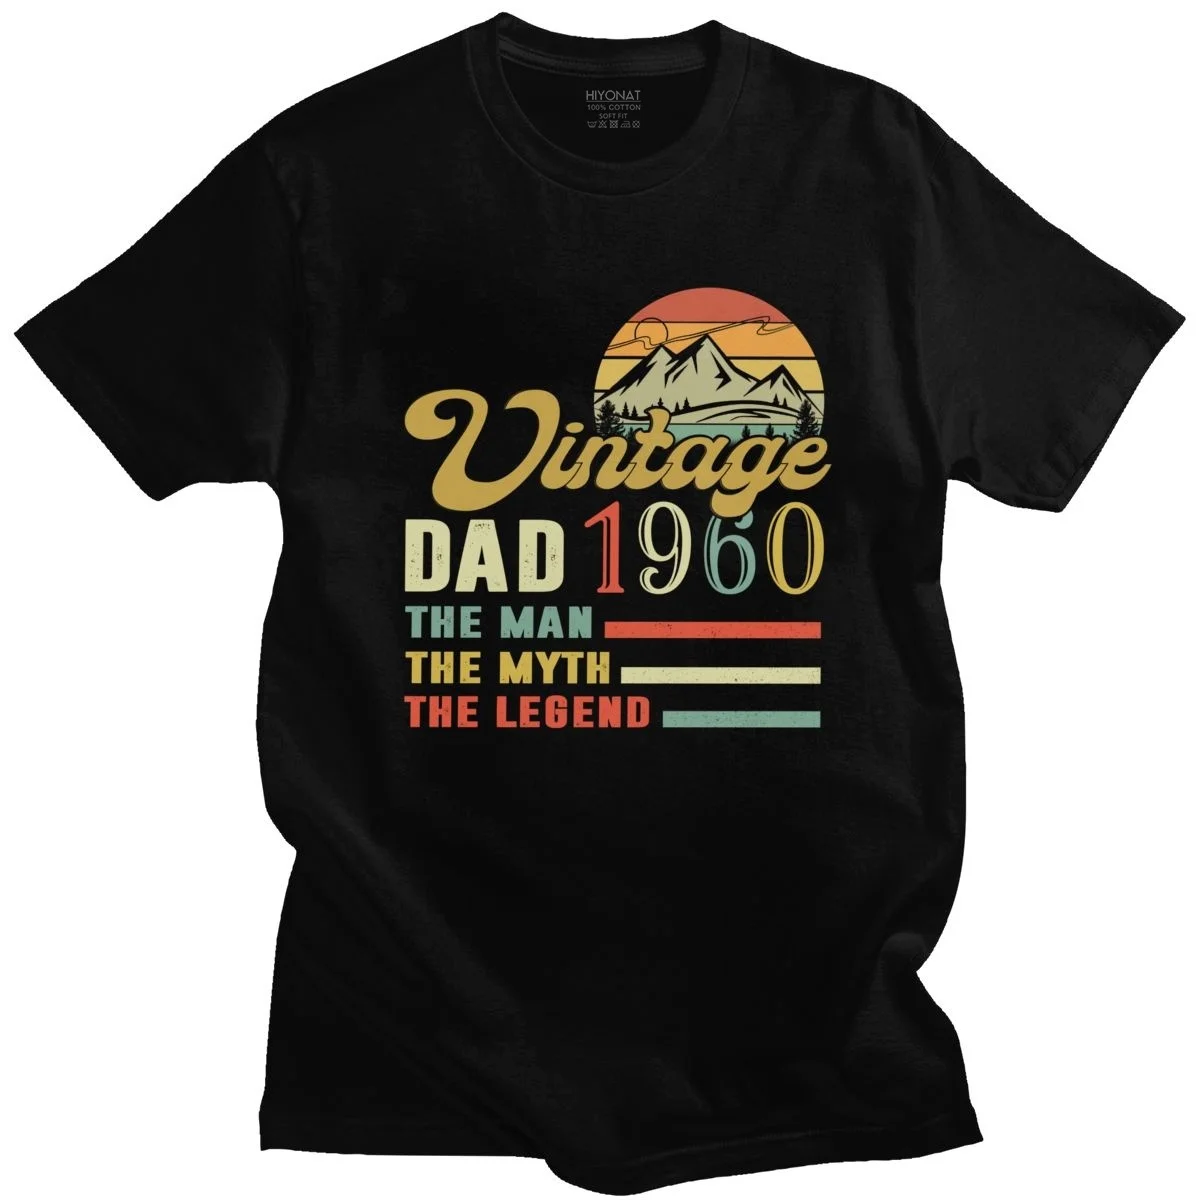 

Vintage Dad 1960 Shirt The Man The Myth The Legend T-shirt Homme Cotton 60s Birthday Gift Tee Tops Short-Sleeve Novelty Tshirt